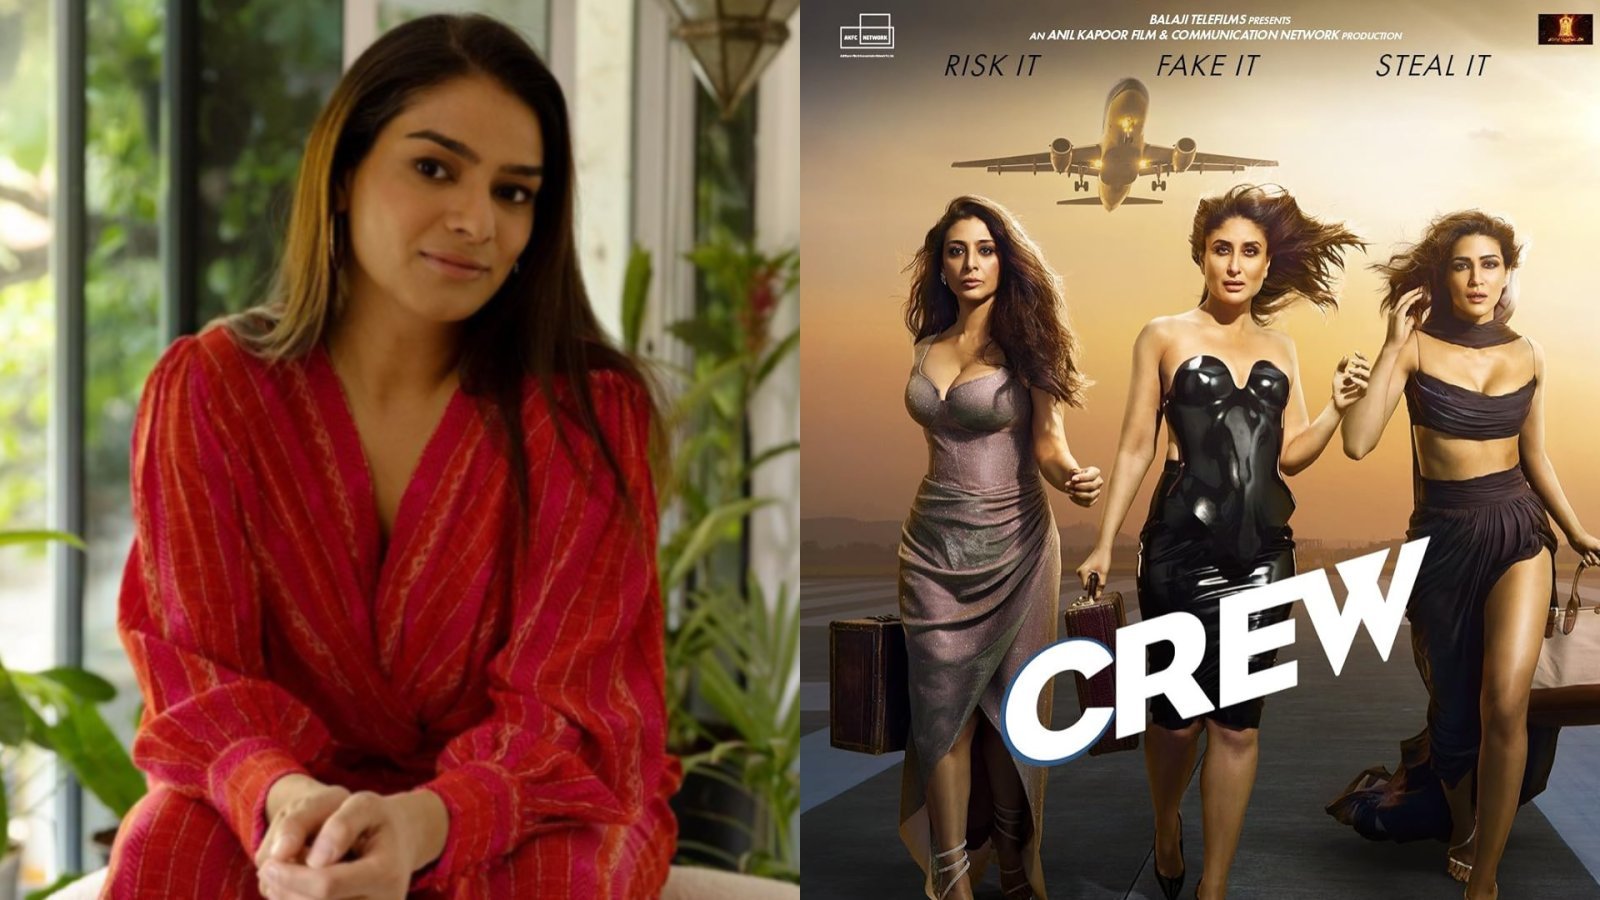 Panchami Ghavri Challenges Stereotypes: 'Women Can Work Together' in 'The Crew'